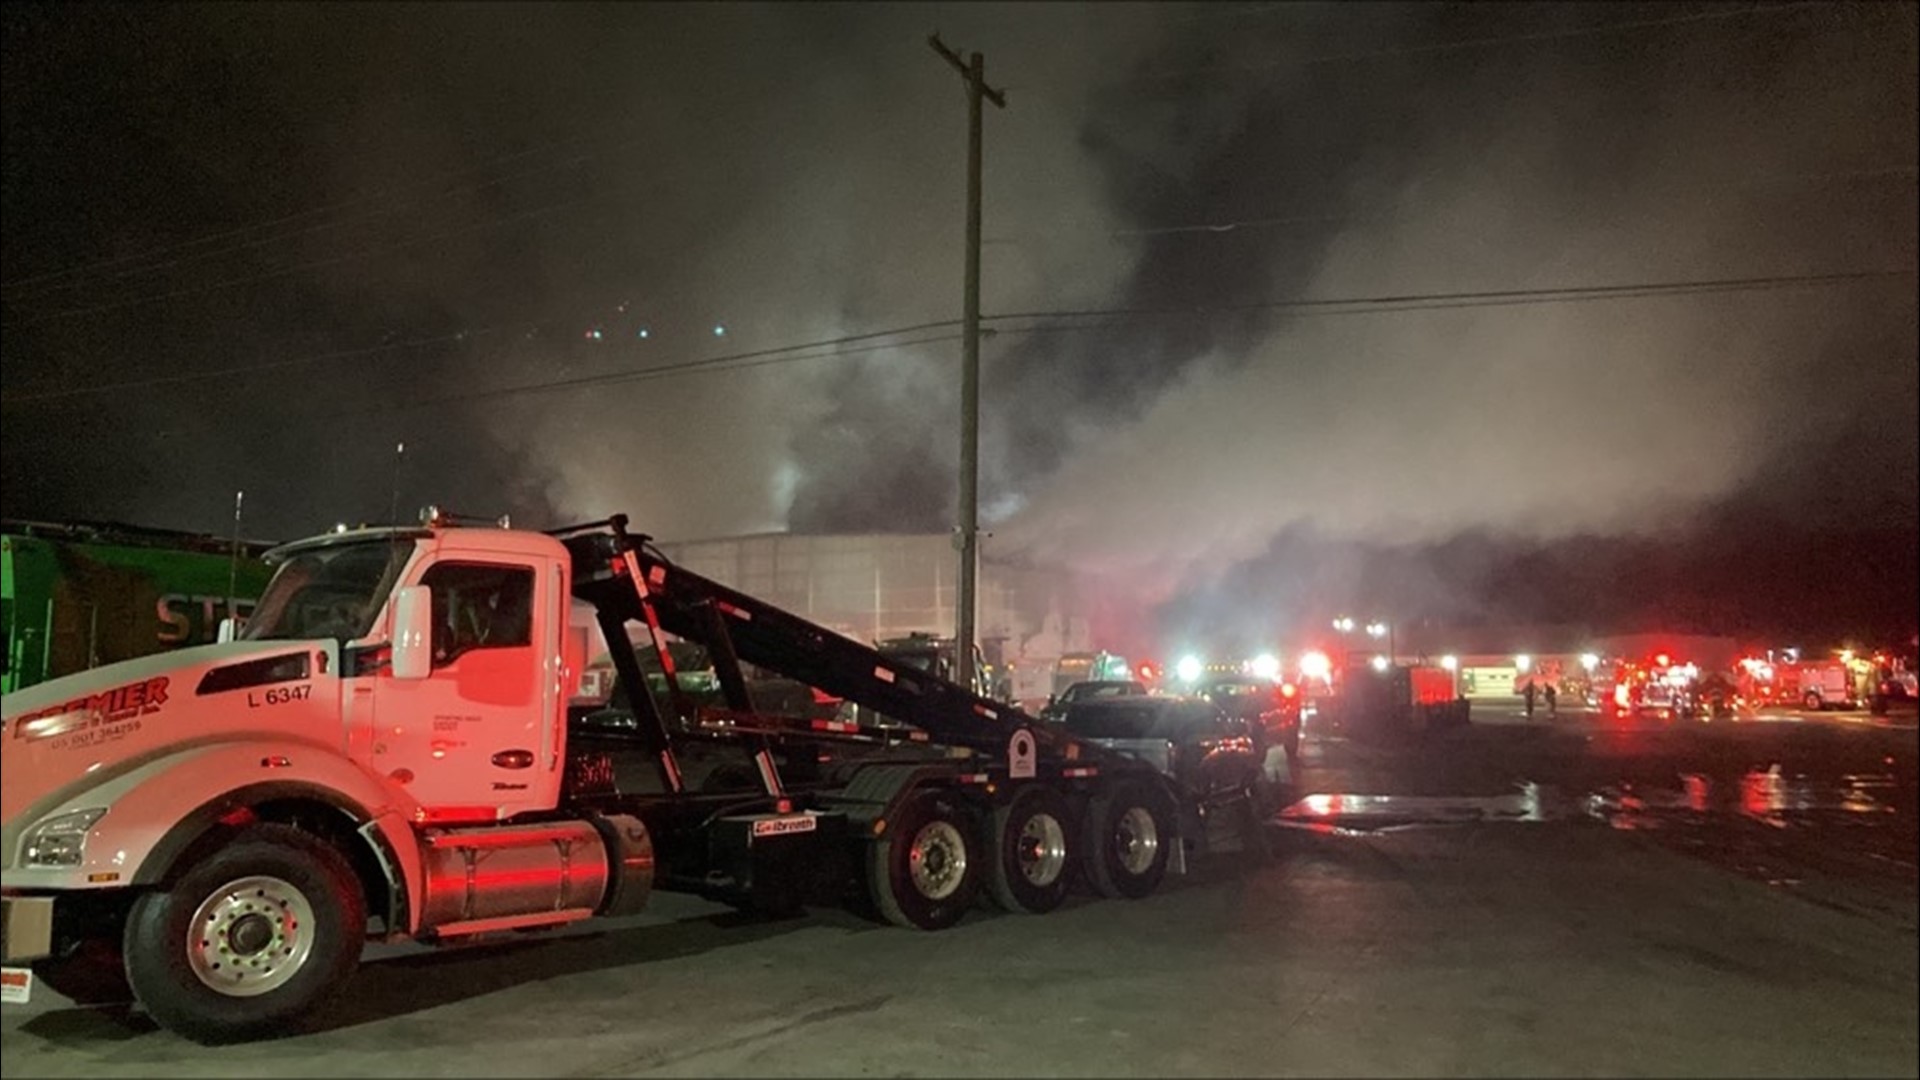 A large fire at Stevens Disposal in Petersburg had firefighters busy into the overnight hours. The company says the fire won't affect service to their customers.